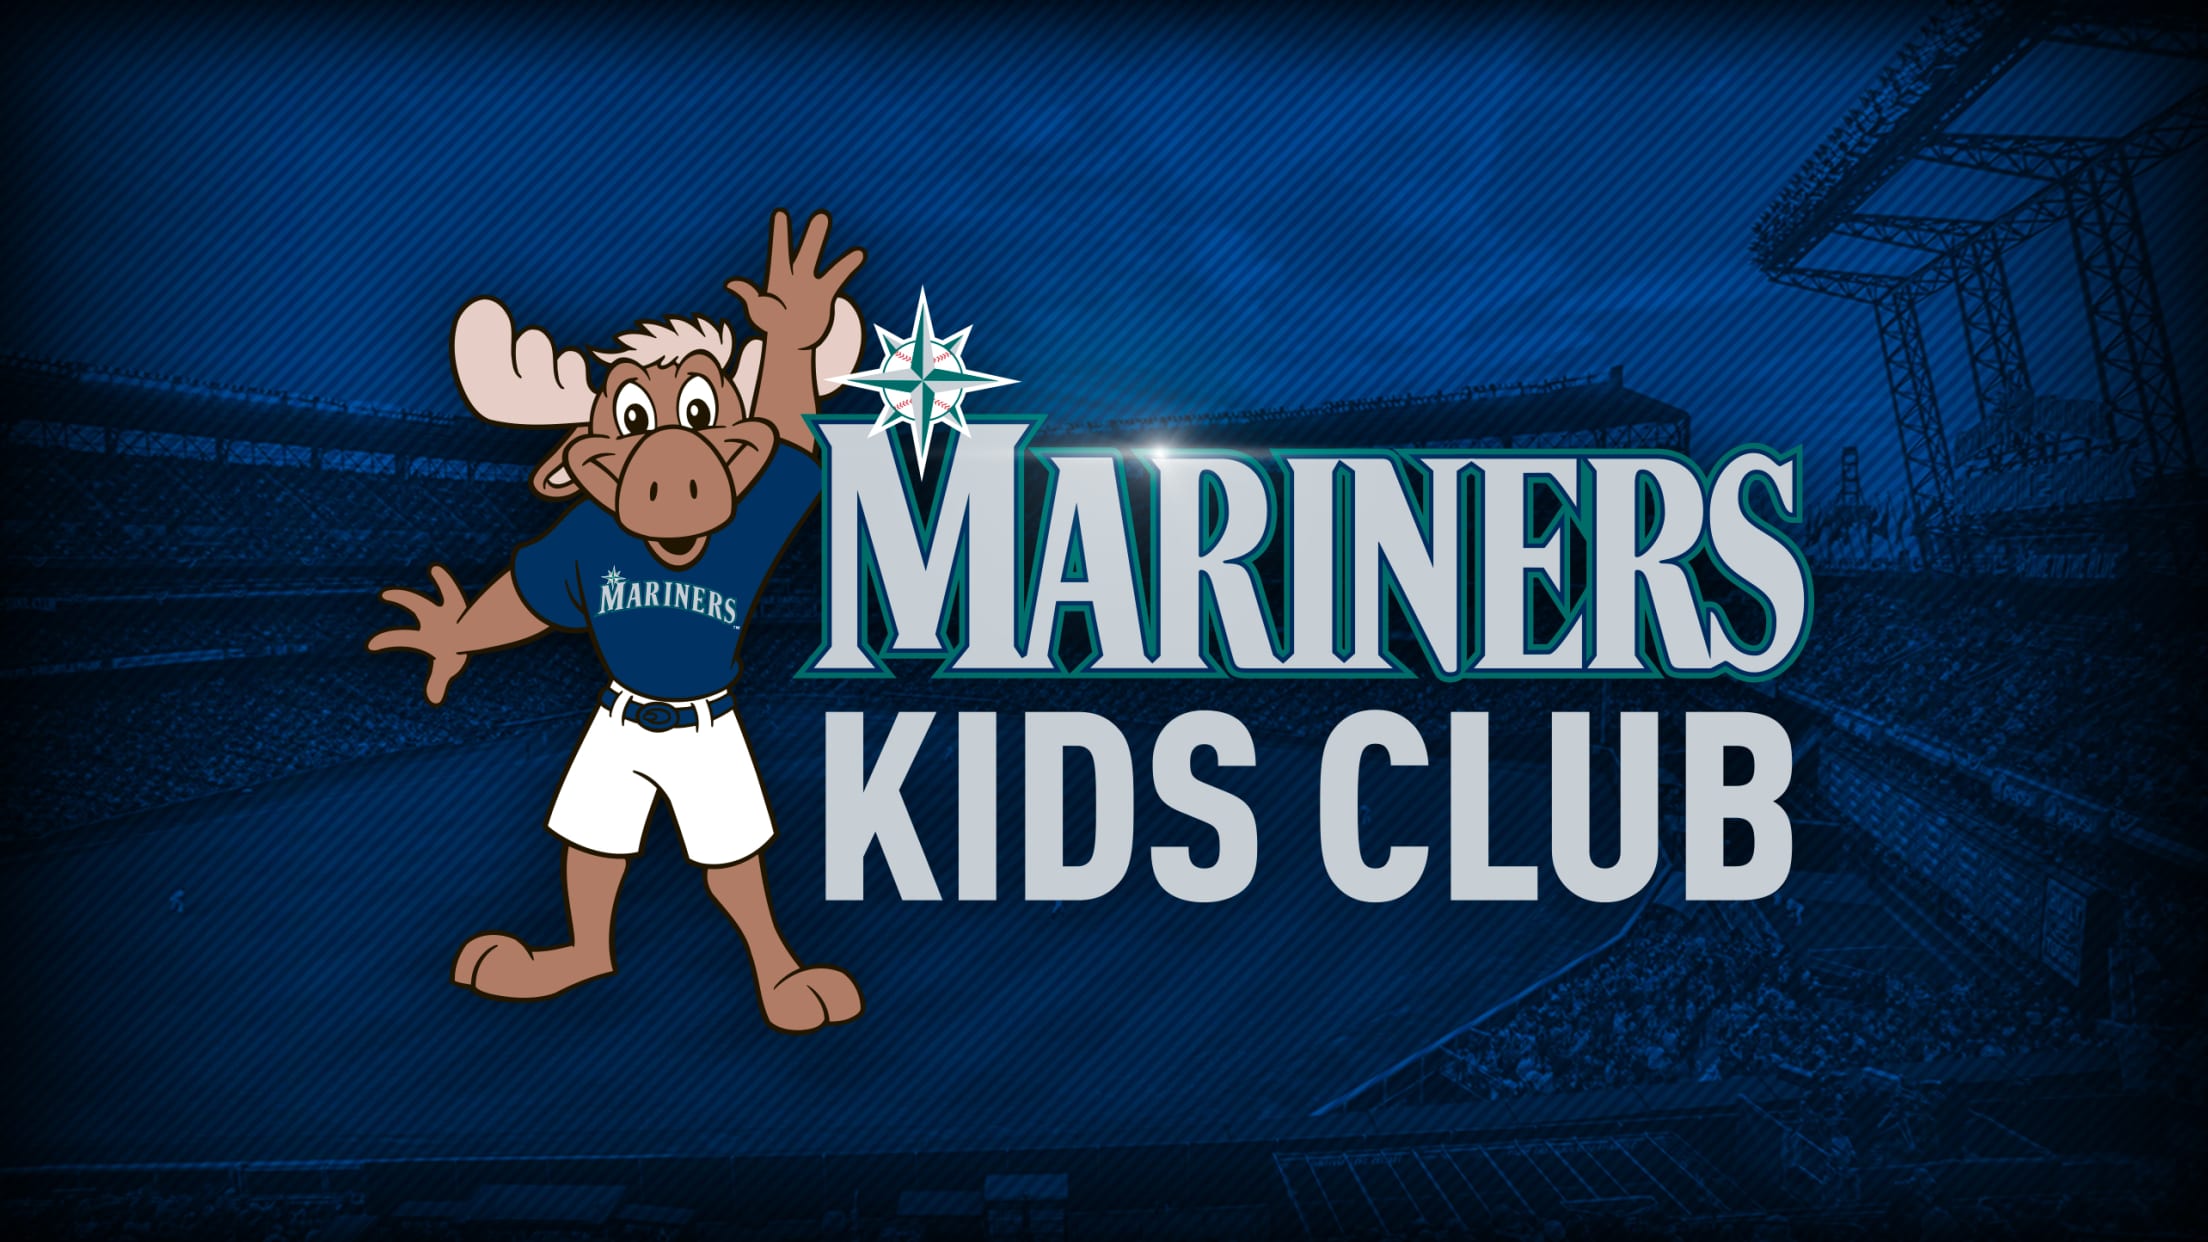 Kids Seattle Mariners Gear, Youth Mariners Apparel, Merchandise